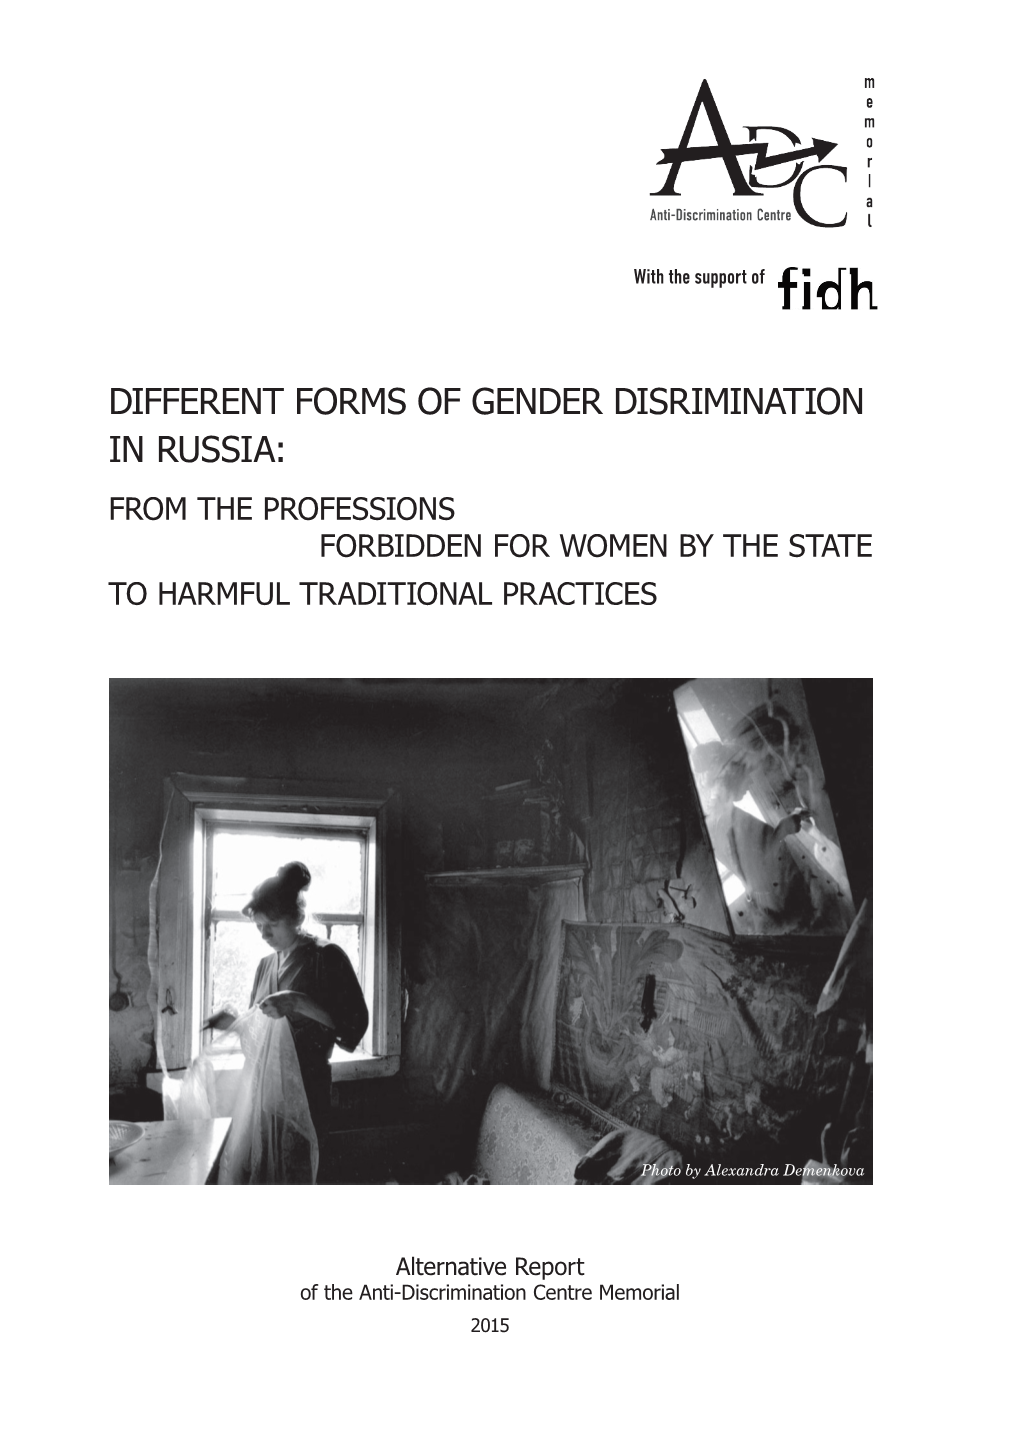 Different Forms of Gender Disrimination in Russia: from the Professions Forbidden for Women by the State to Harmful Traditional Practices